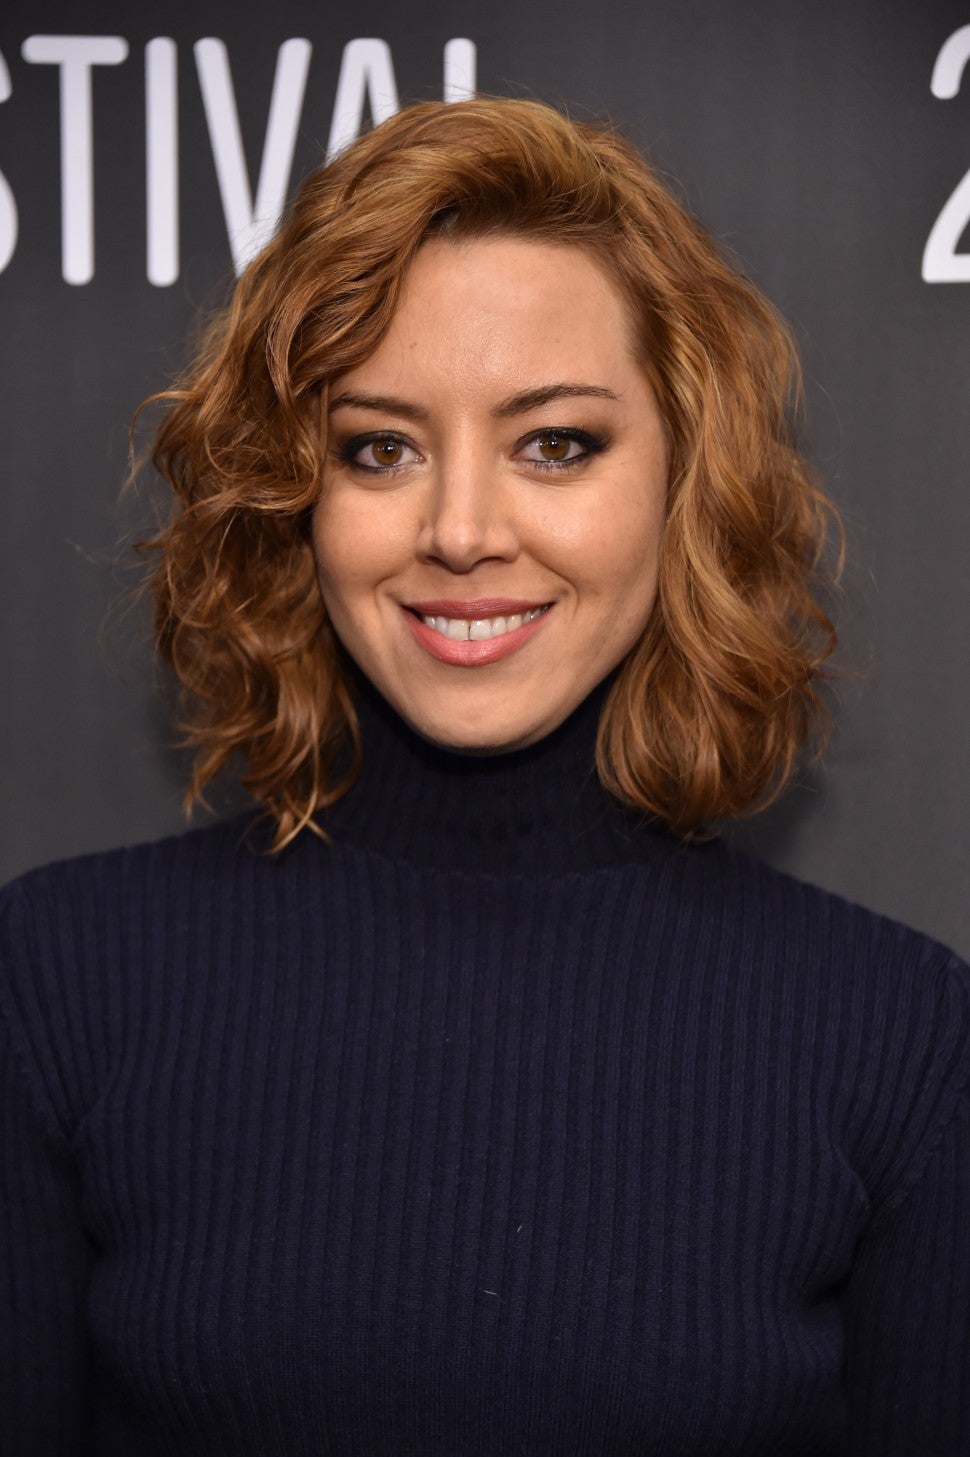 Aubrey Plaza Almost Married One Of Her Co-Stars In Las Vegas